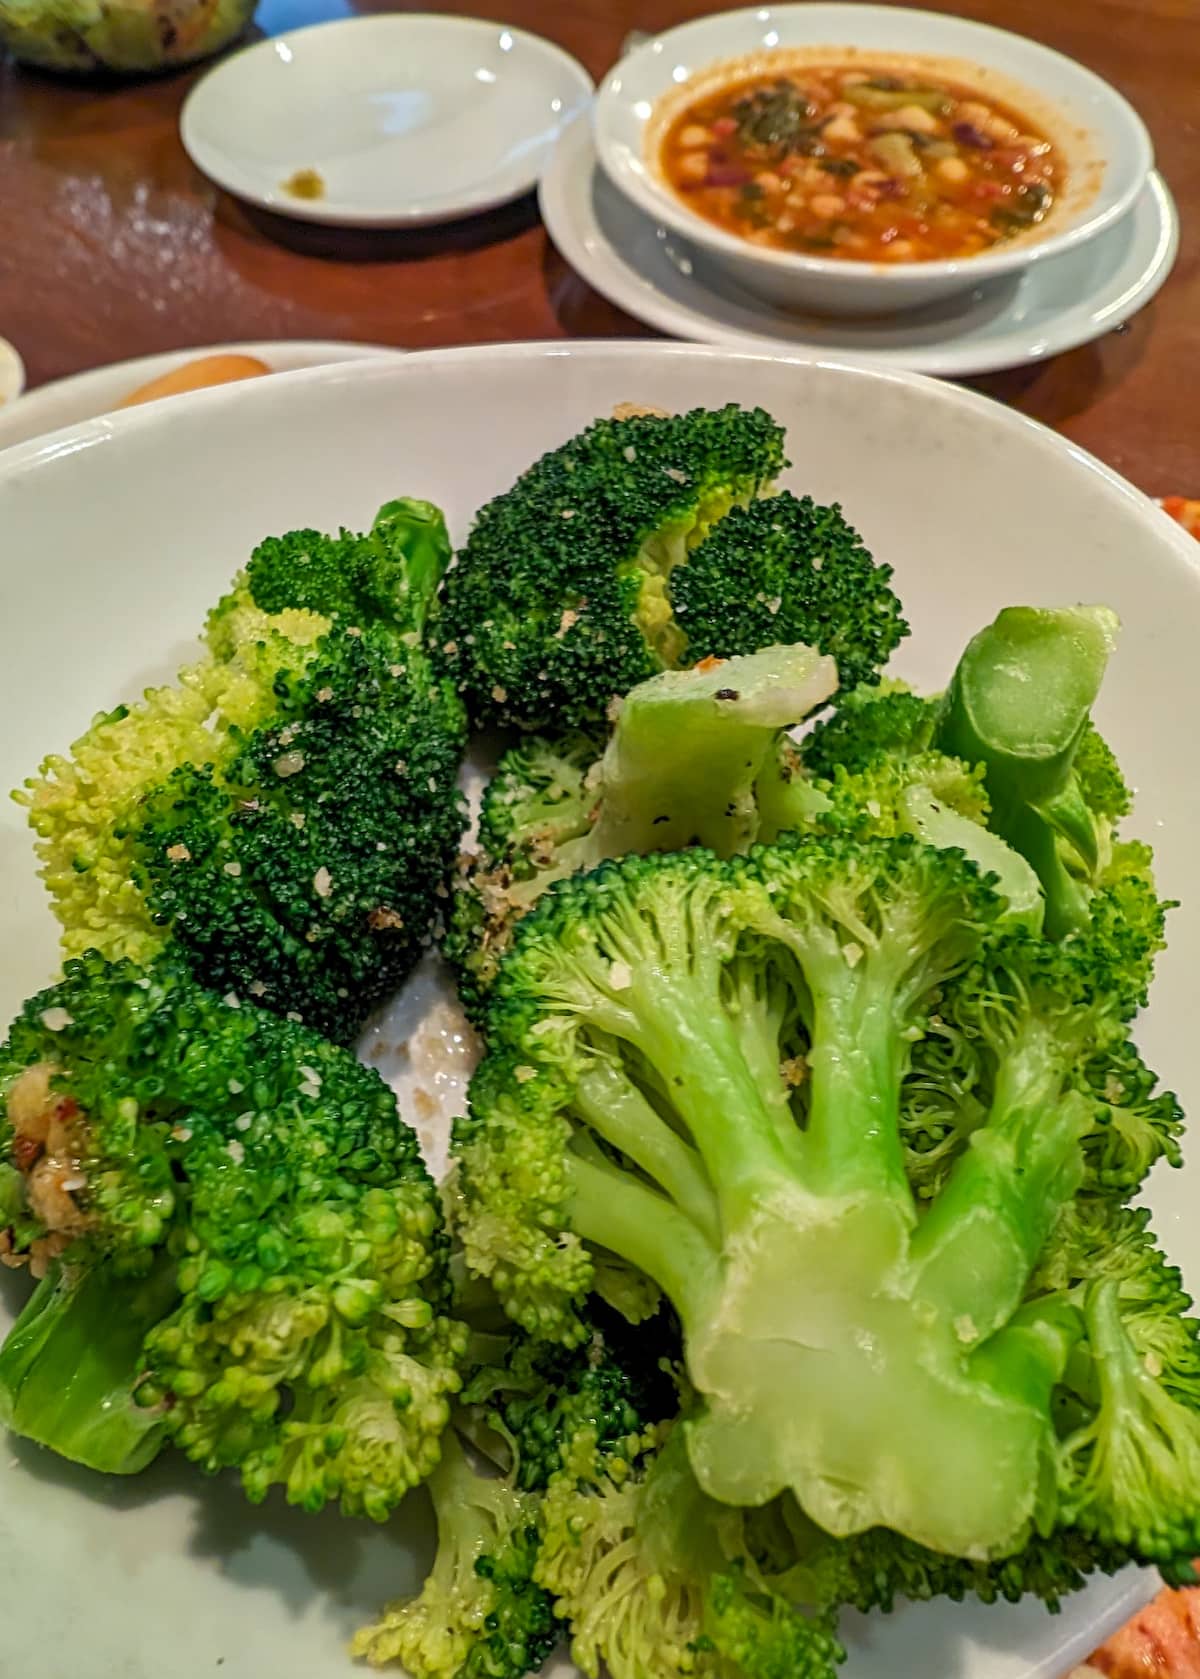 A bowl of steamed broccoli from Olive Garden.